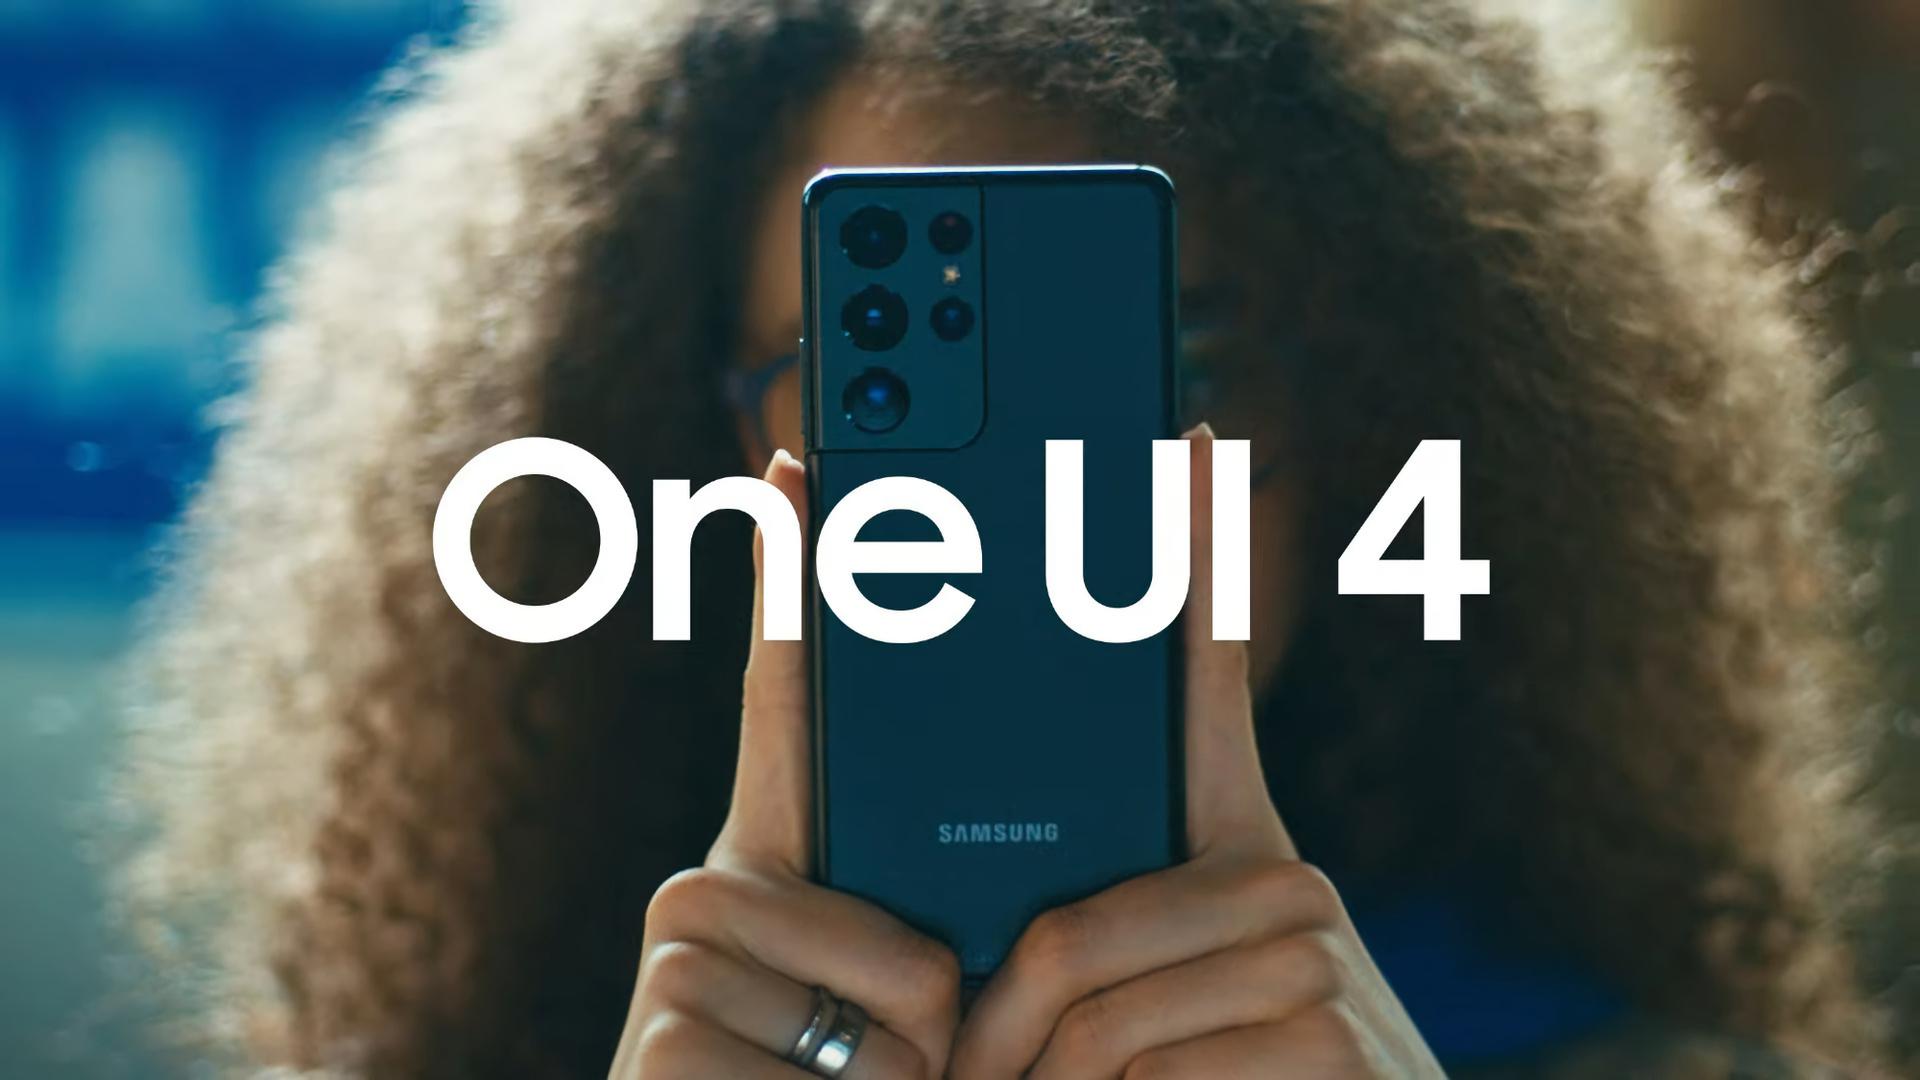 Samsung showed details of One UI 4 in official video